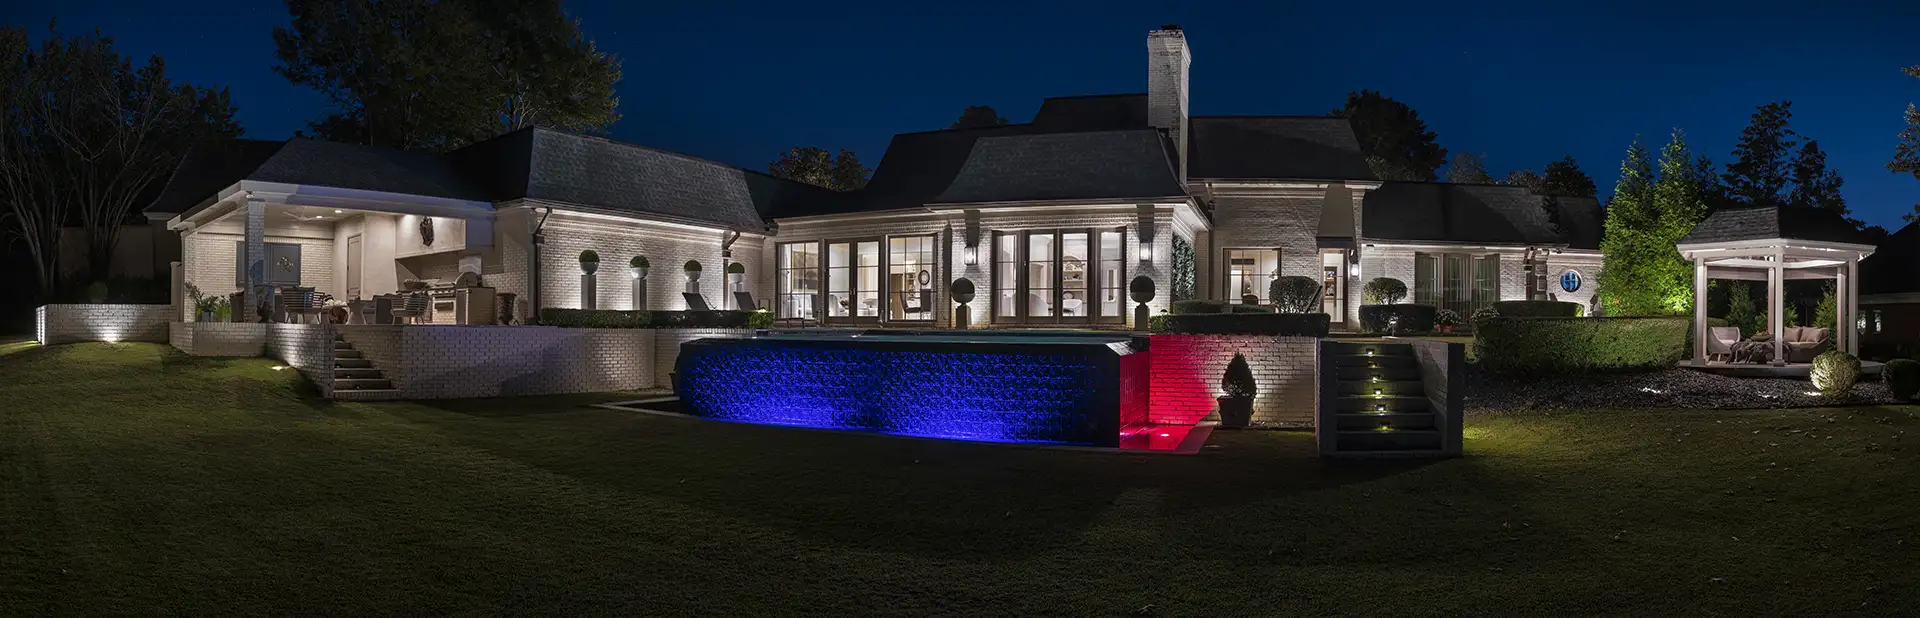 Winged Foot image 10 rear of house pool Lighthouse Outdoor Lighting and Audio Jackson MS